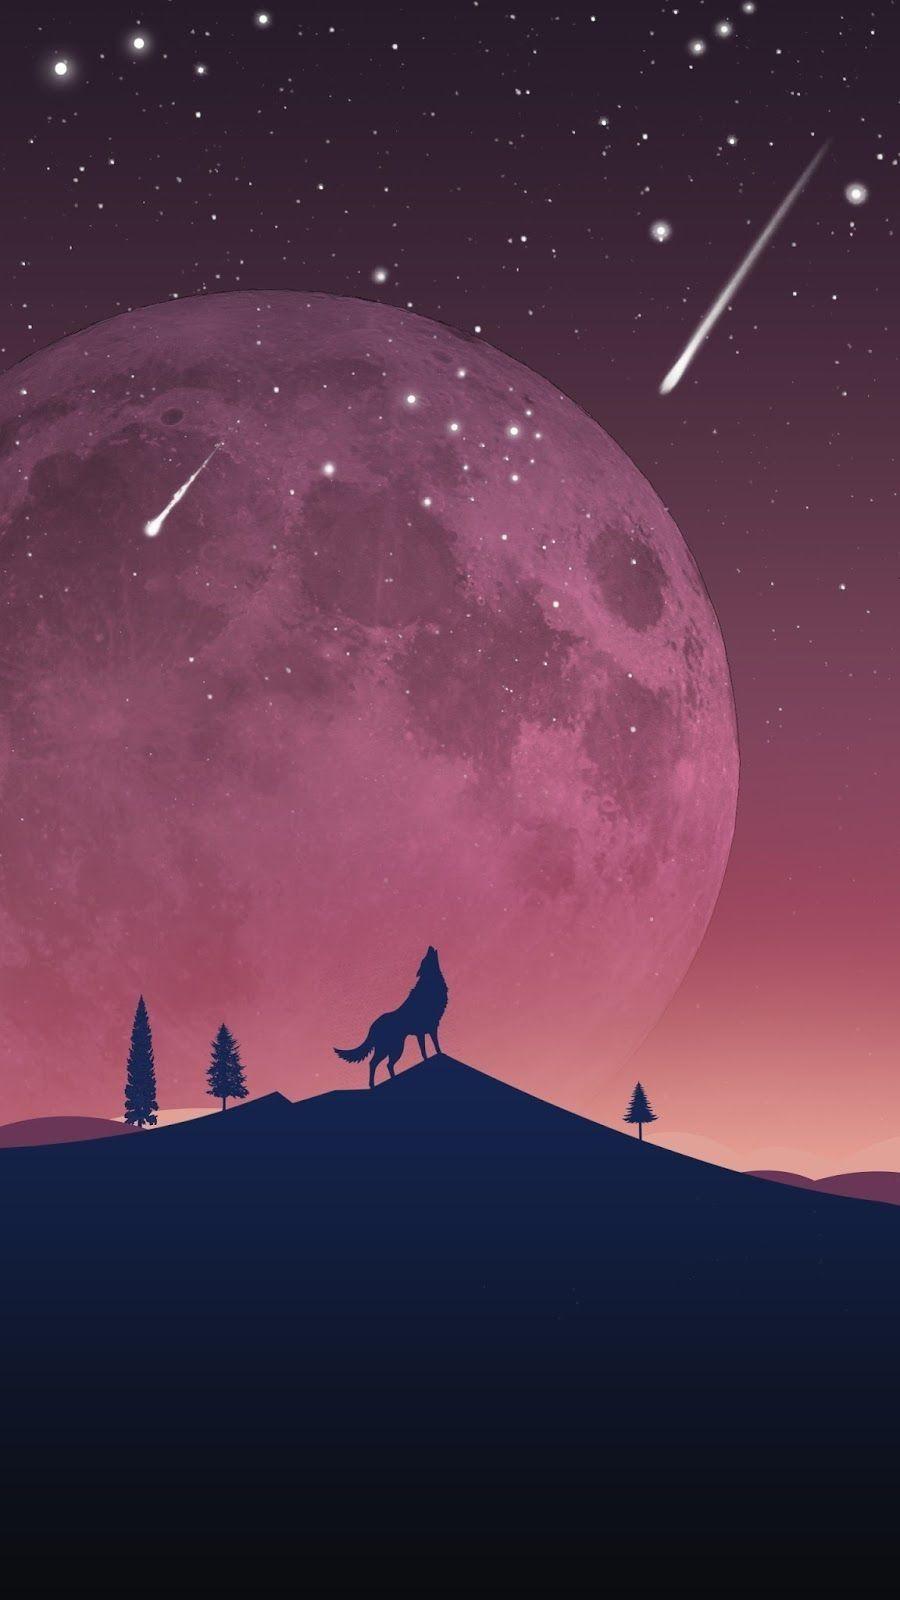 Desert at Night Wallpaper Awesome Wolf Wallpaper Galaxy S7 Edge